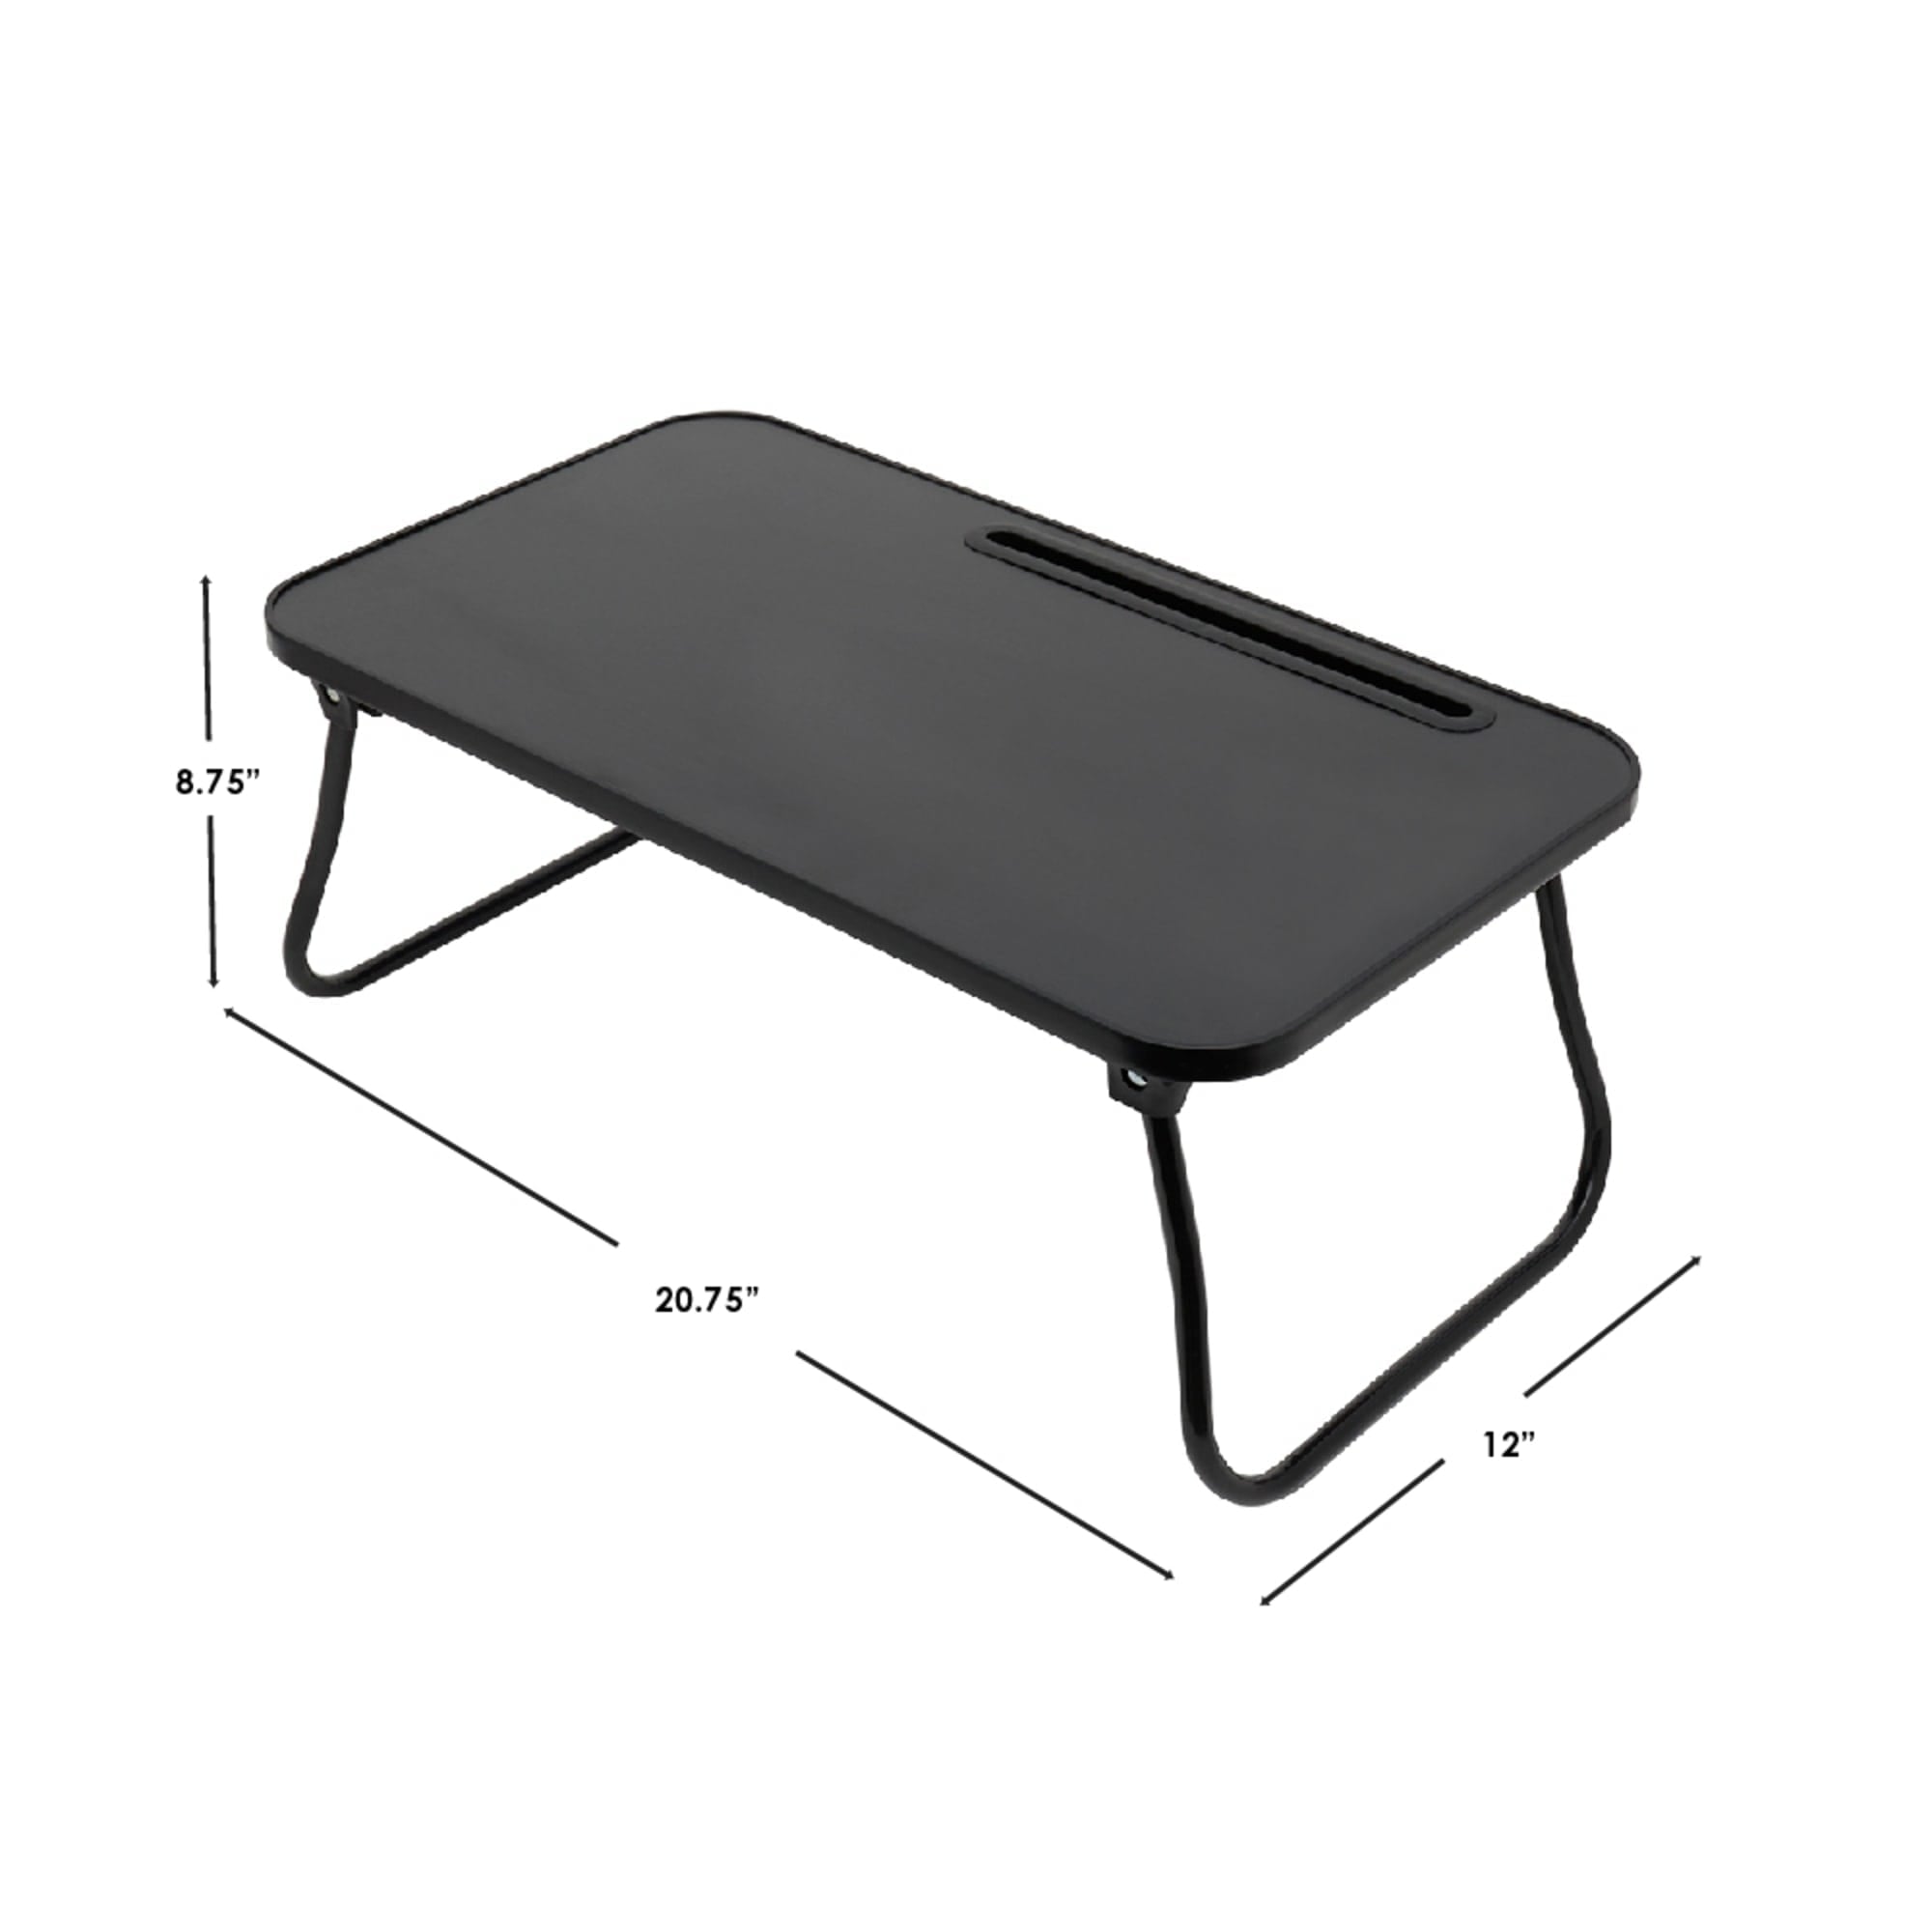 Home Basics Laptop Tray with Folding Legs and Media Slot $12.00 EACH, CASE PACK OF 8